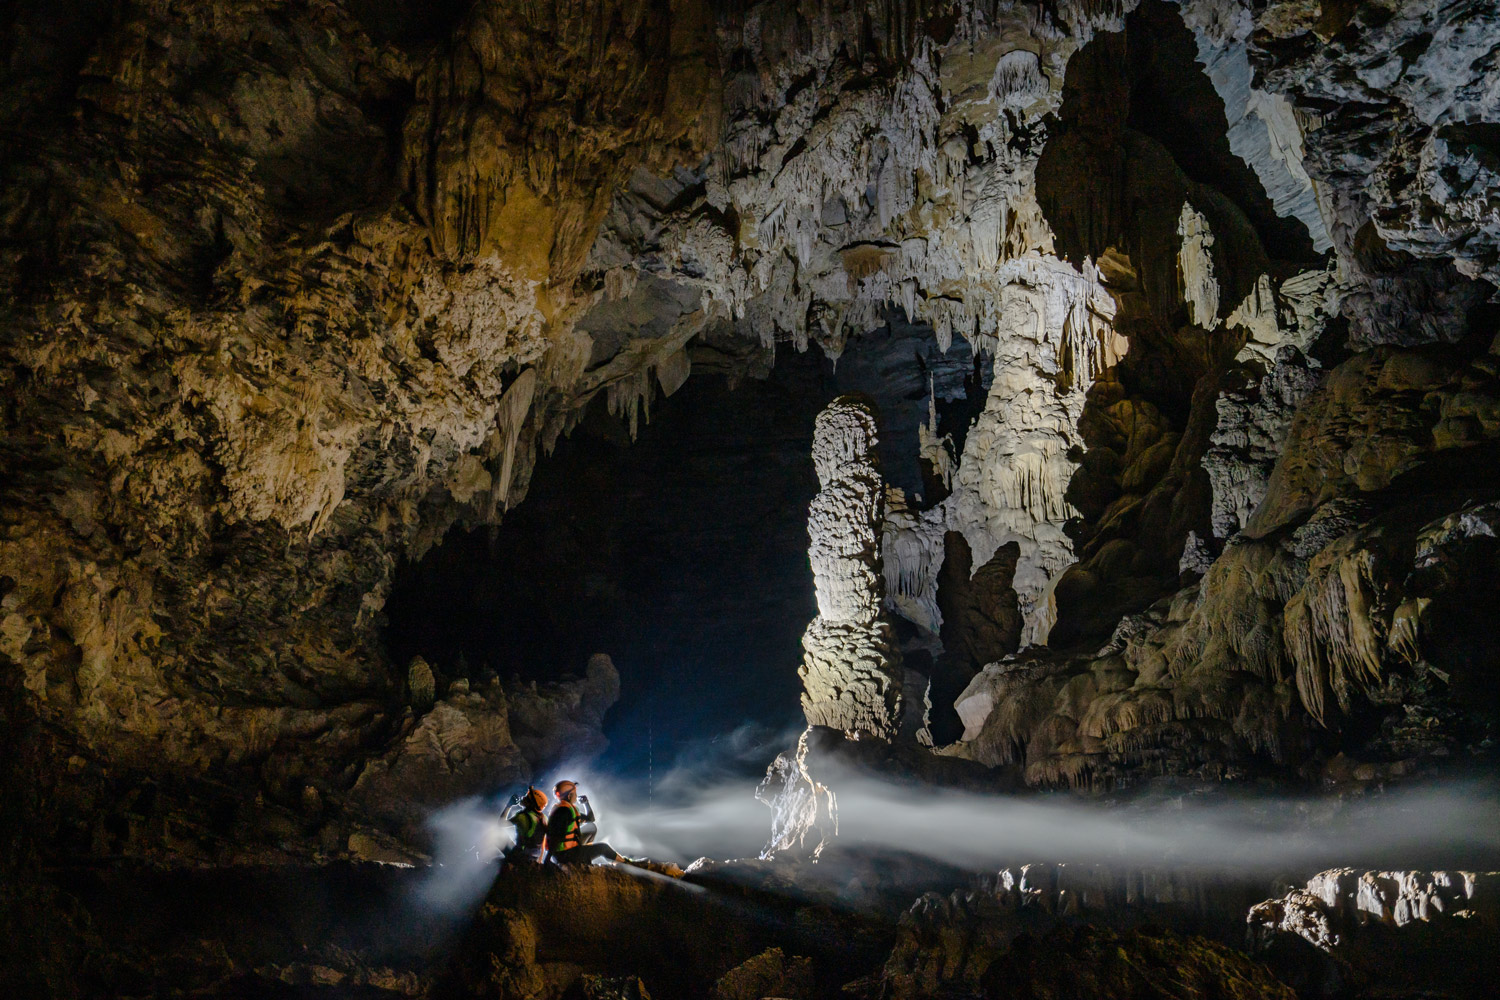 Ken Cave boasts an awe-inspiring entrance and a corridor that stretches up to 30 meters wide, making it a truly remarkable cave.